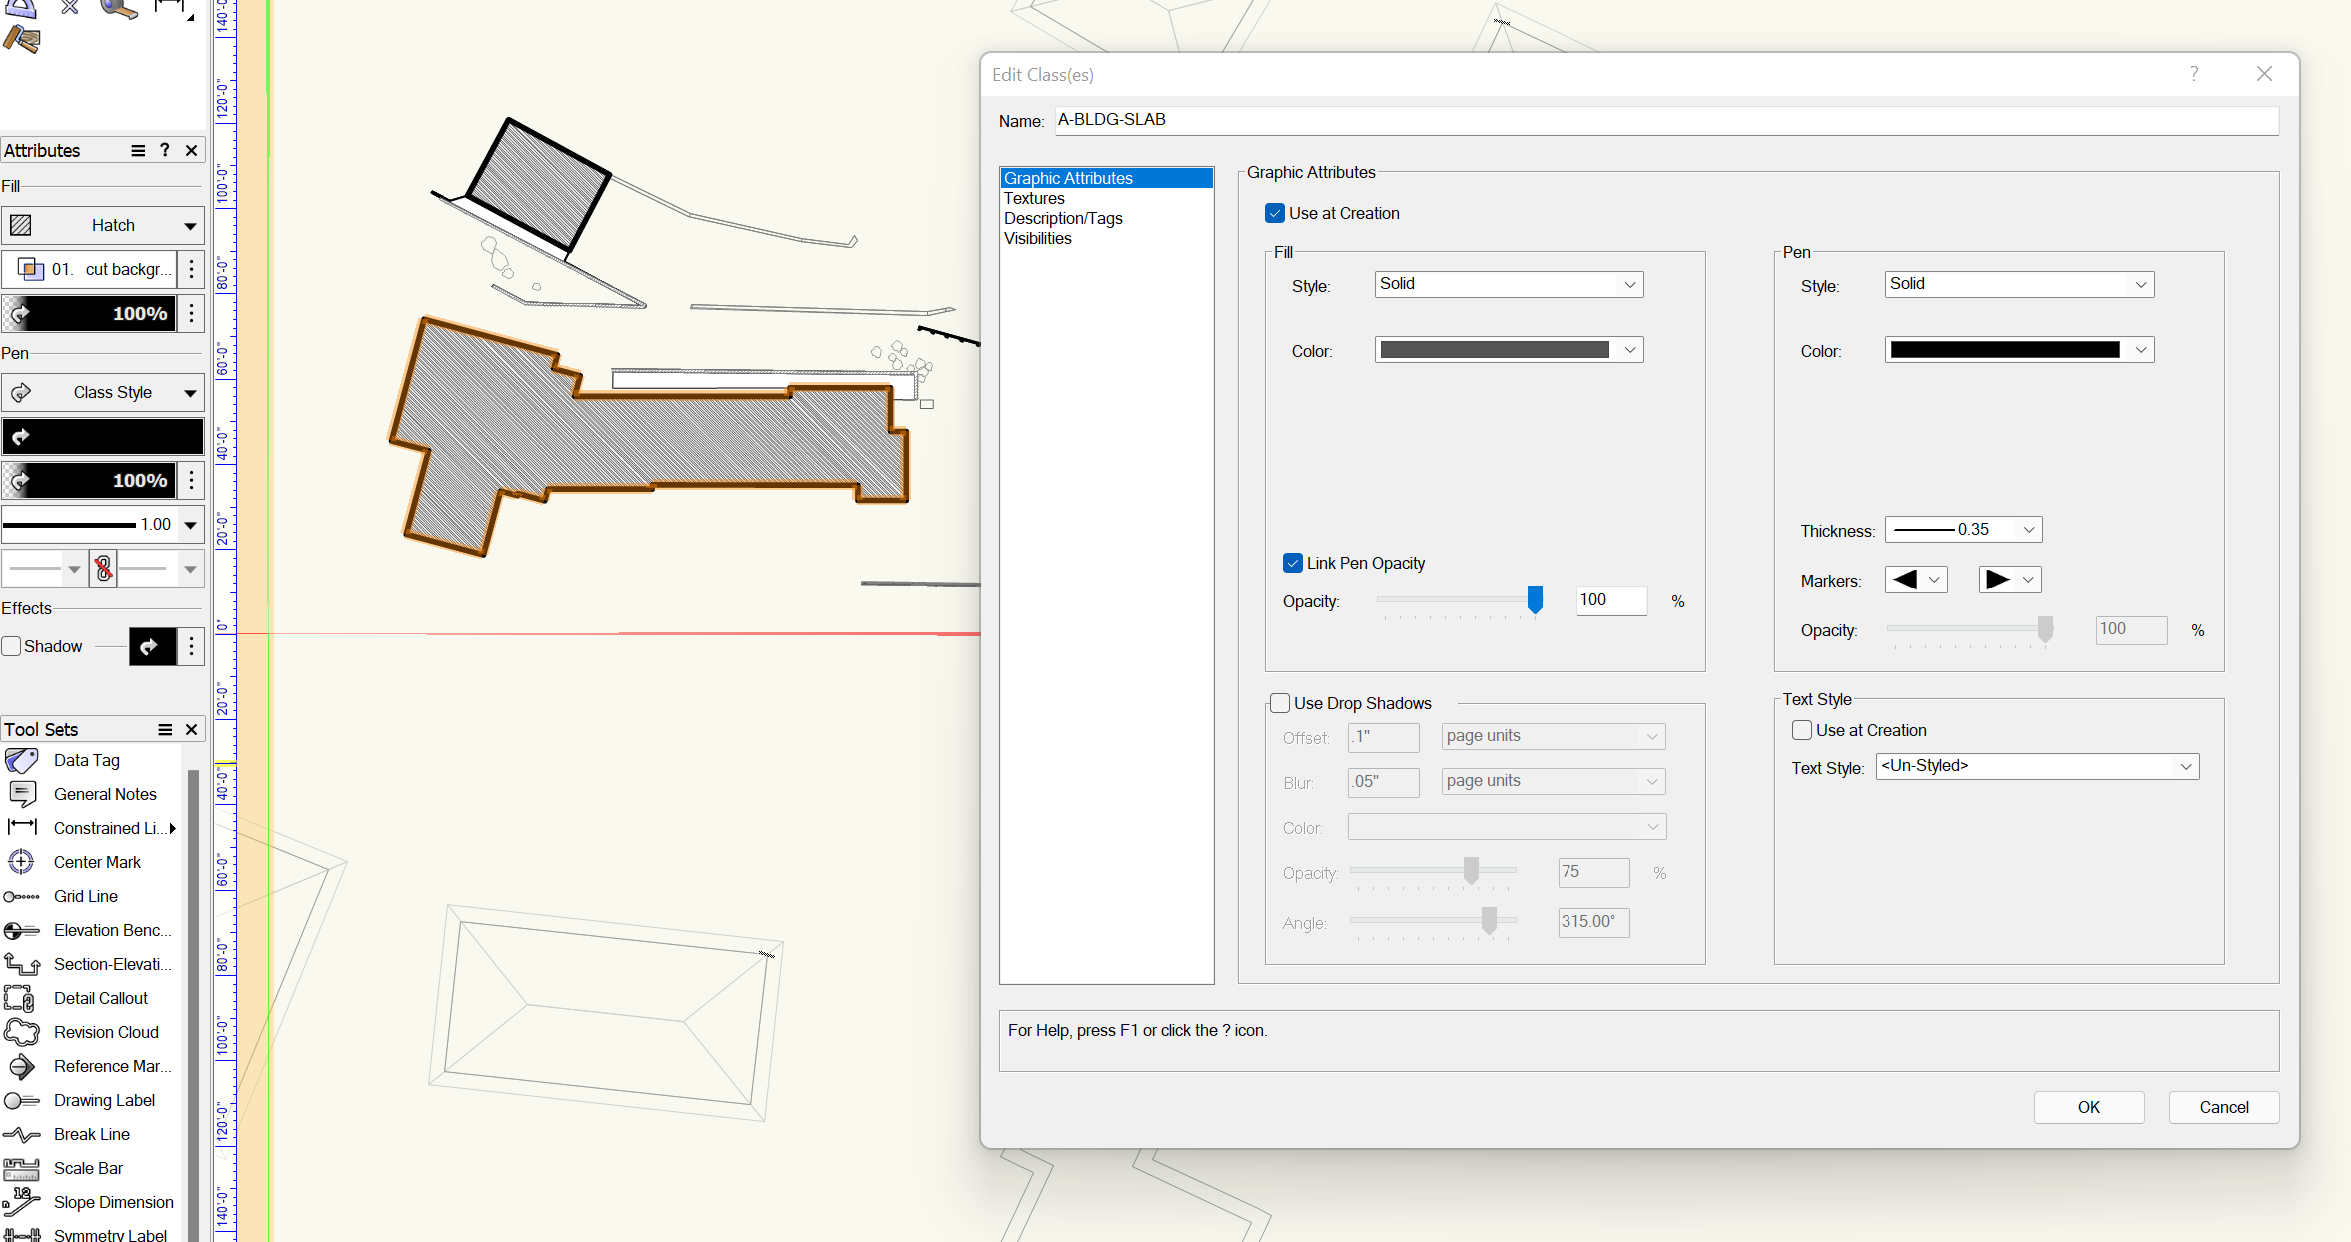 Hatch Scaling - Troubleshooting - Vectorworks Community Board